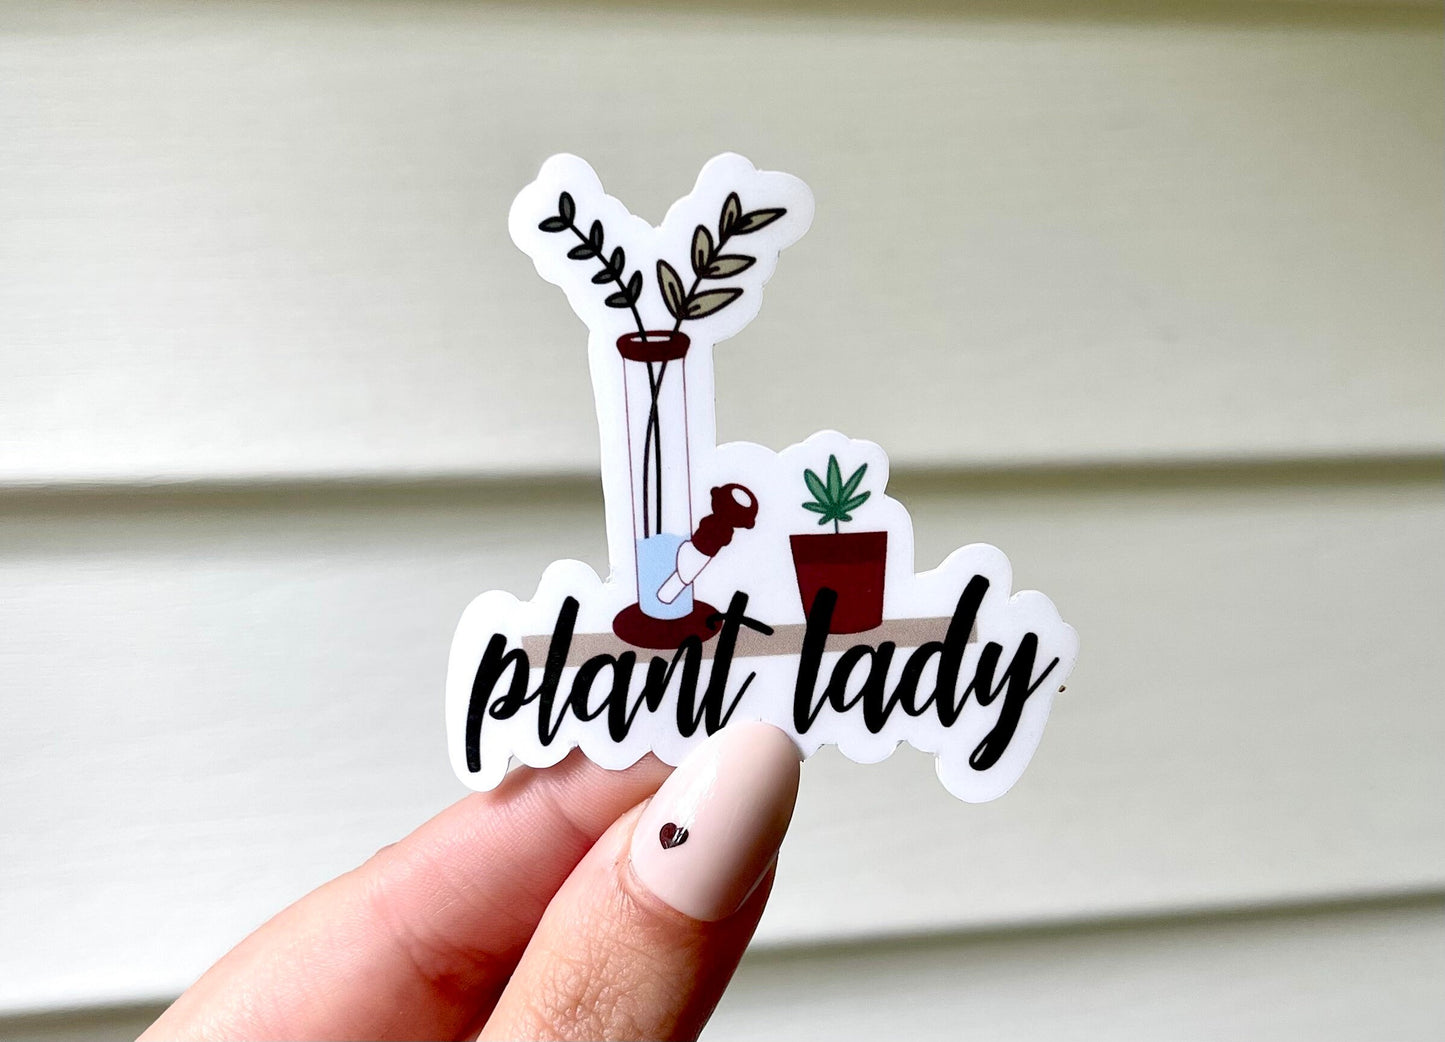 Plant Lady Waterproof Sticker, Plant Lady Magnet, 420 Friendly Laptop Sticker, Bud Lady, Stoner Gifts, Tumbler Stickers, Car Decal